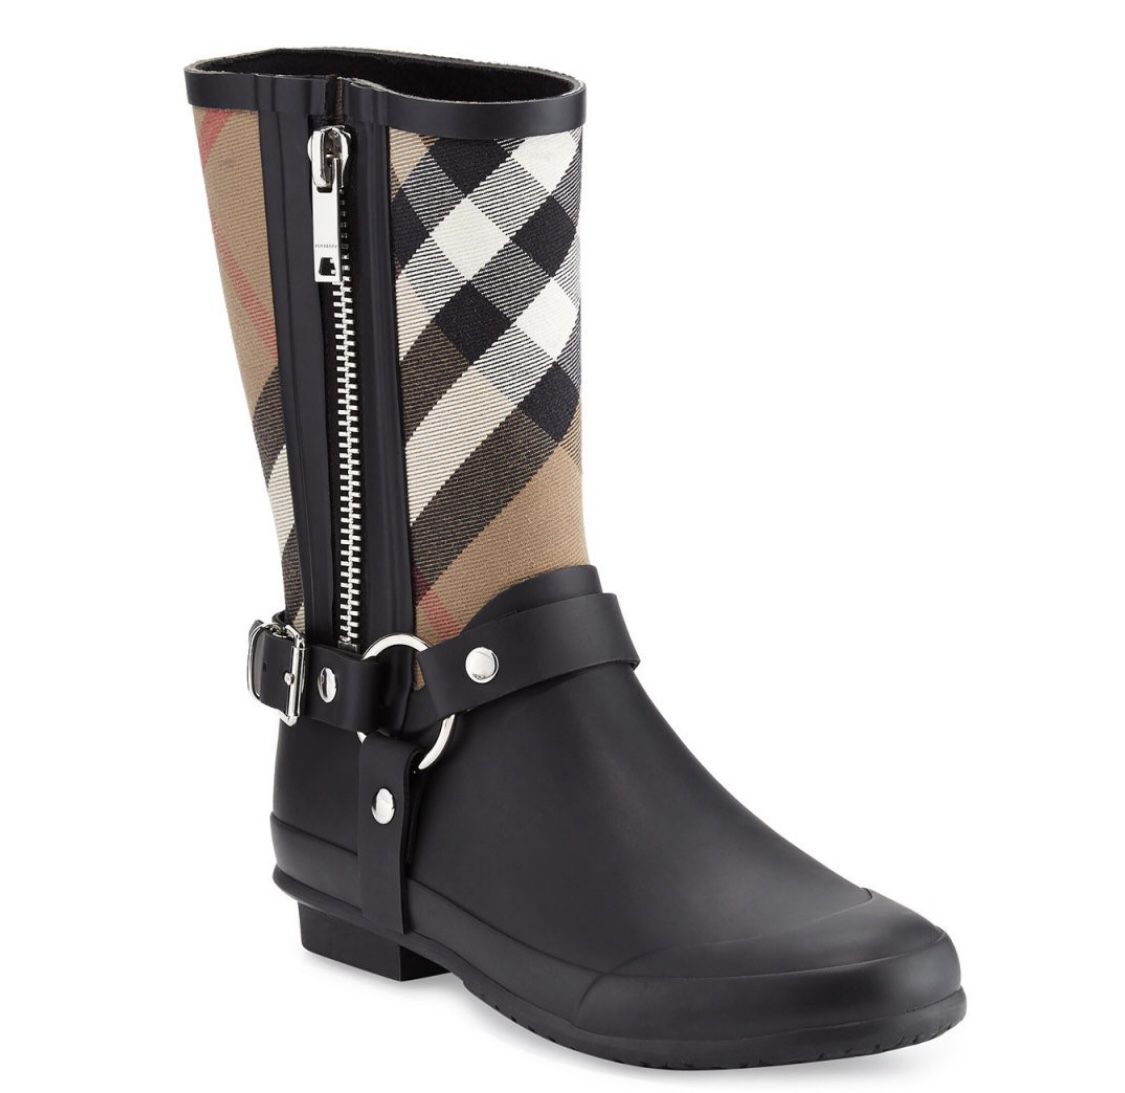 Brand new Burberry Boots